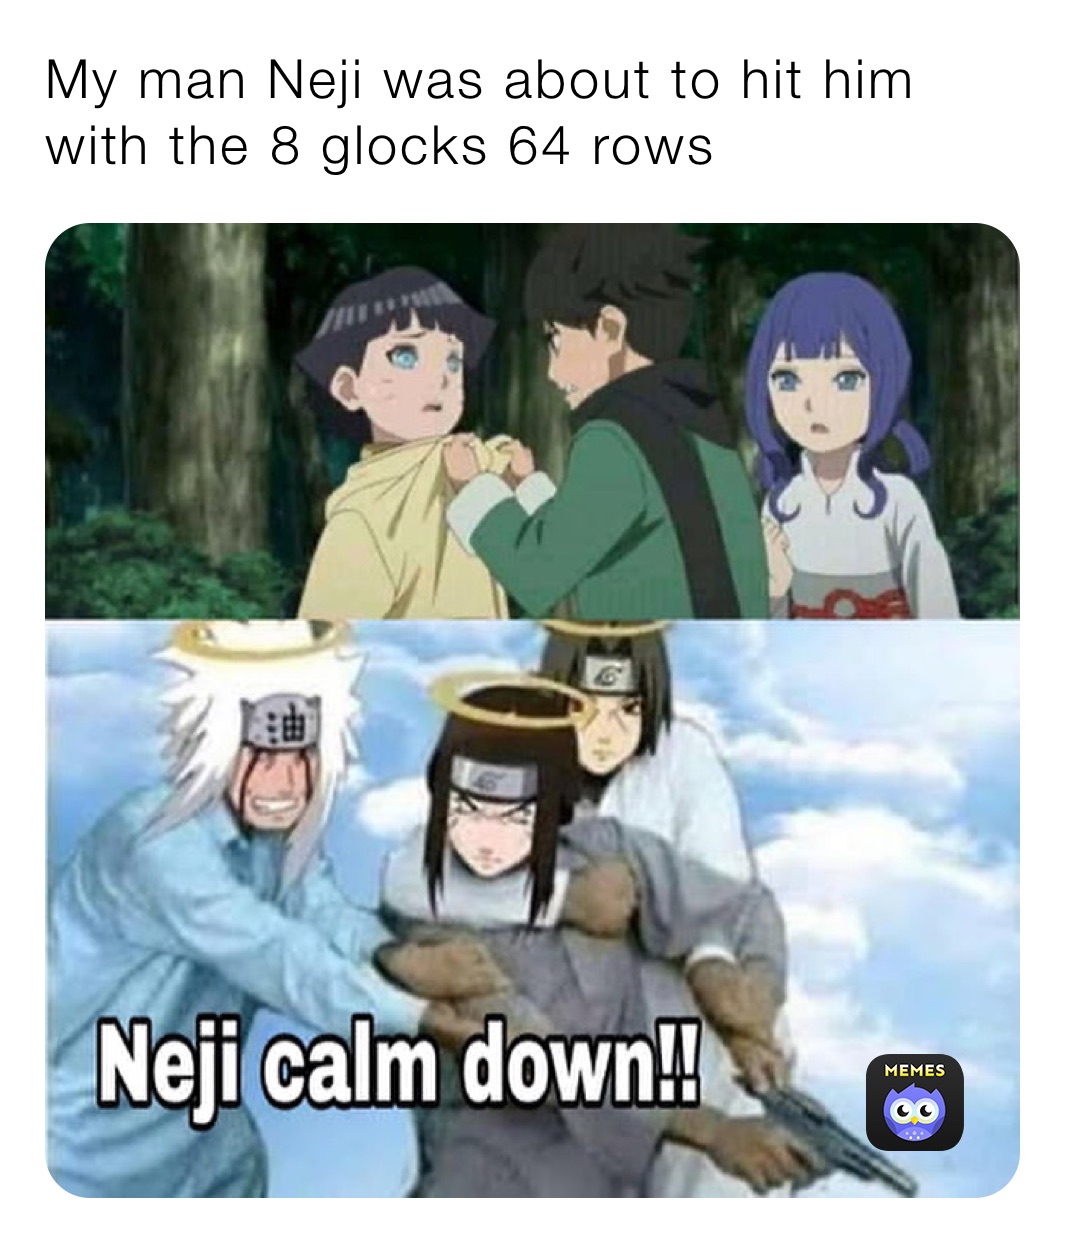 My man Neji was about to hit him with the 8 glocks 64 rows